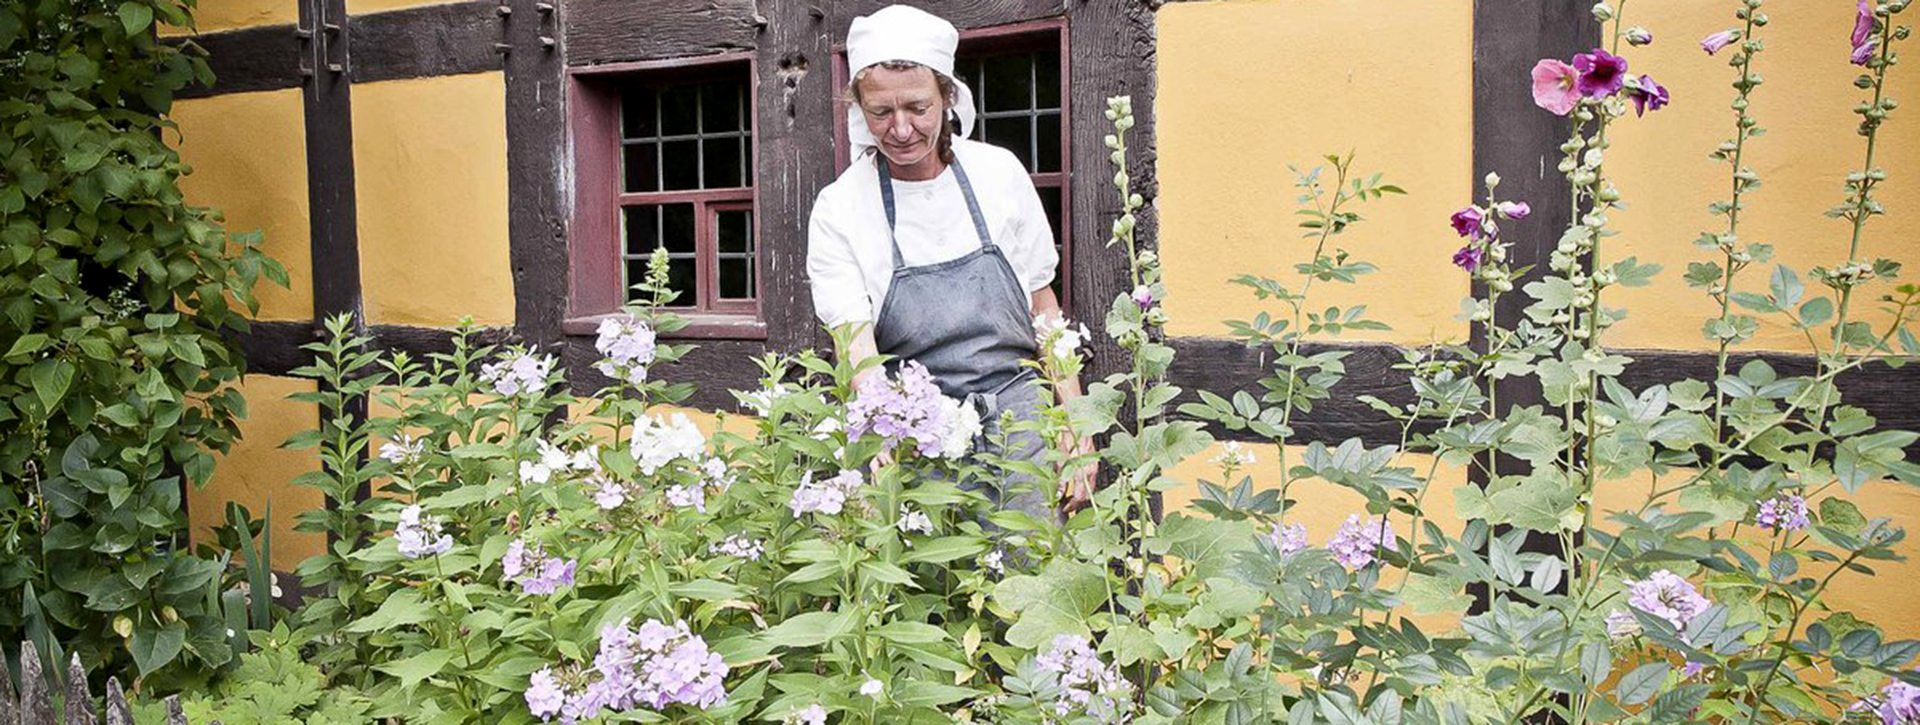 A woman with a white headscarf is standing behind tall plants in front of a yellow half-timbered house